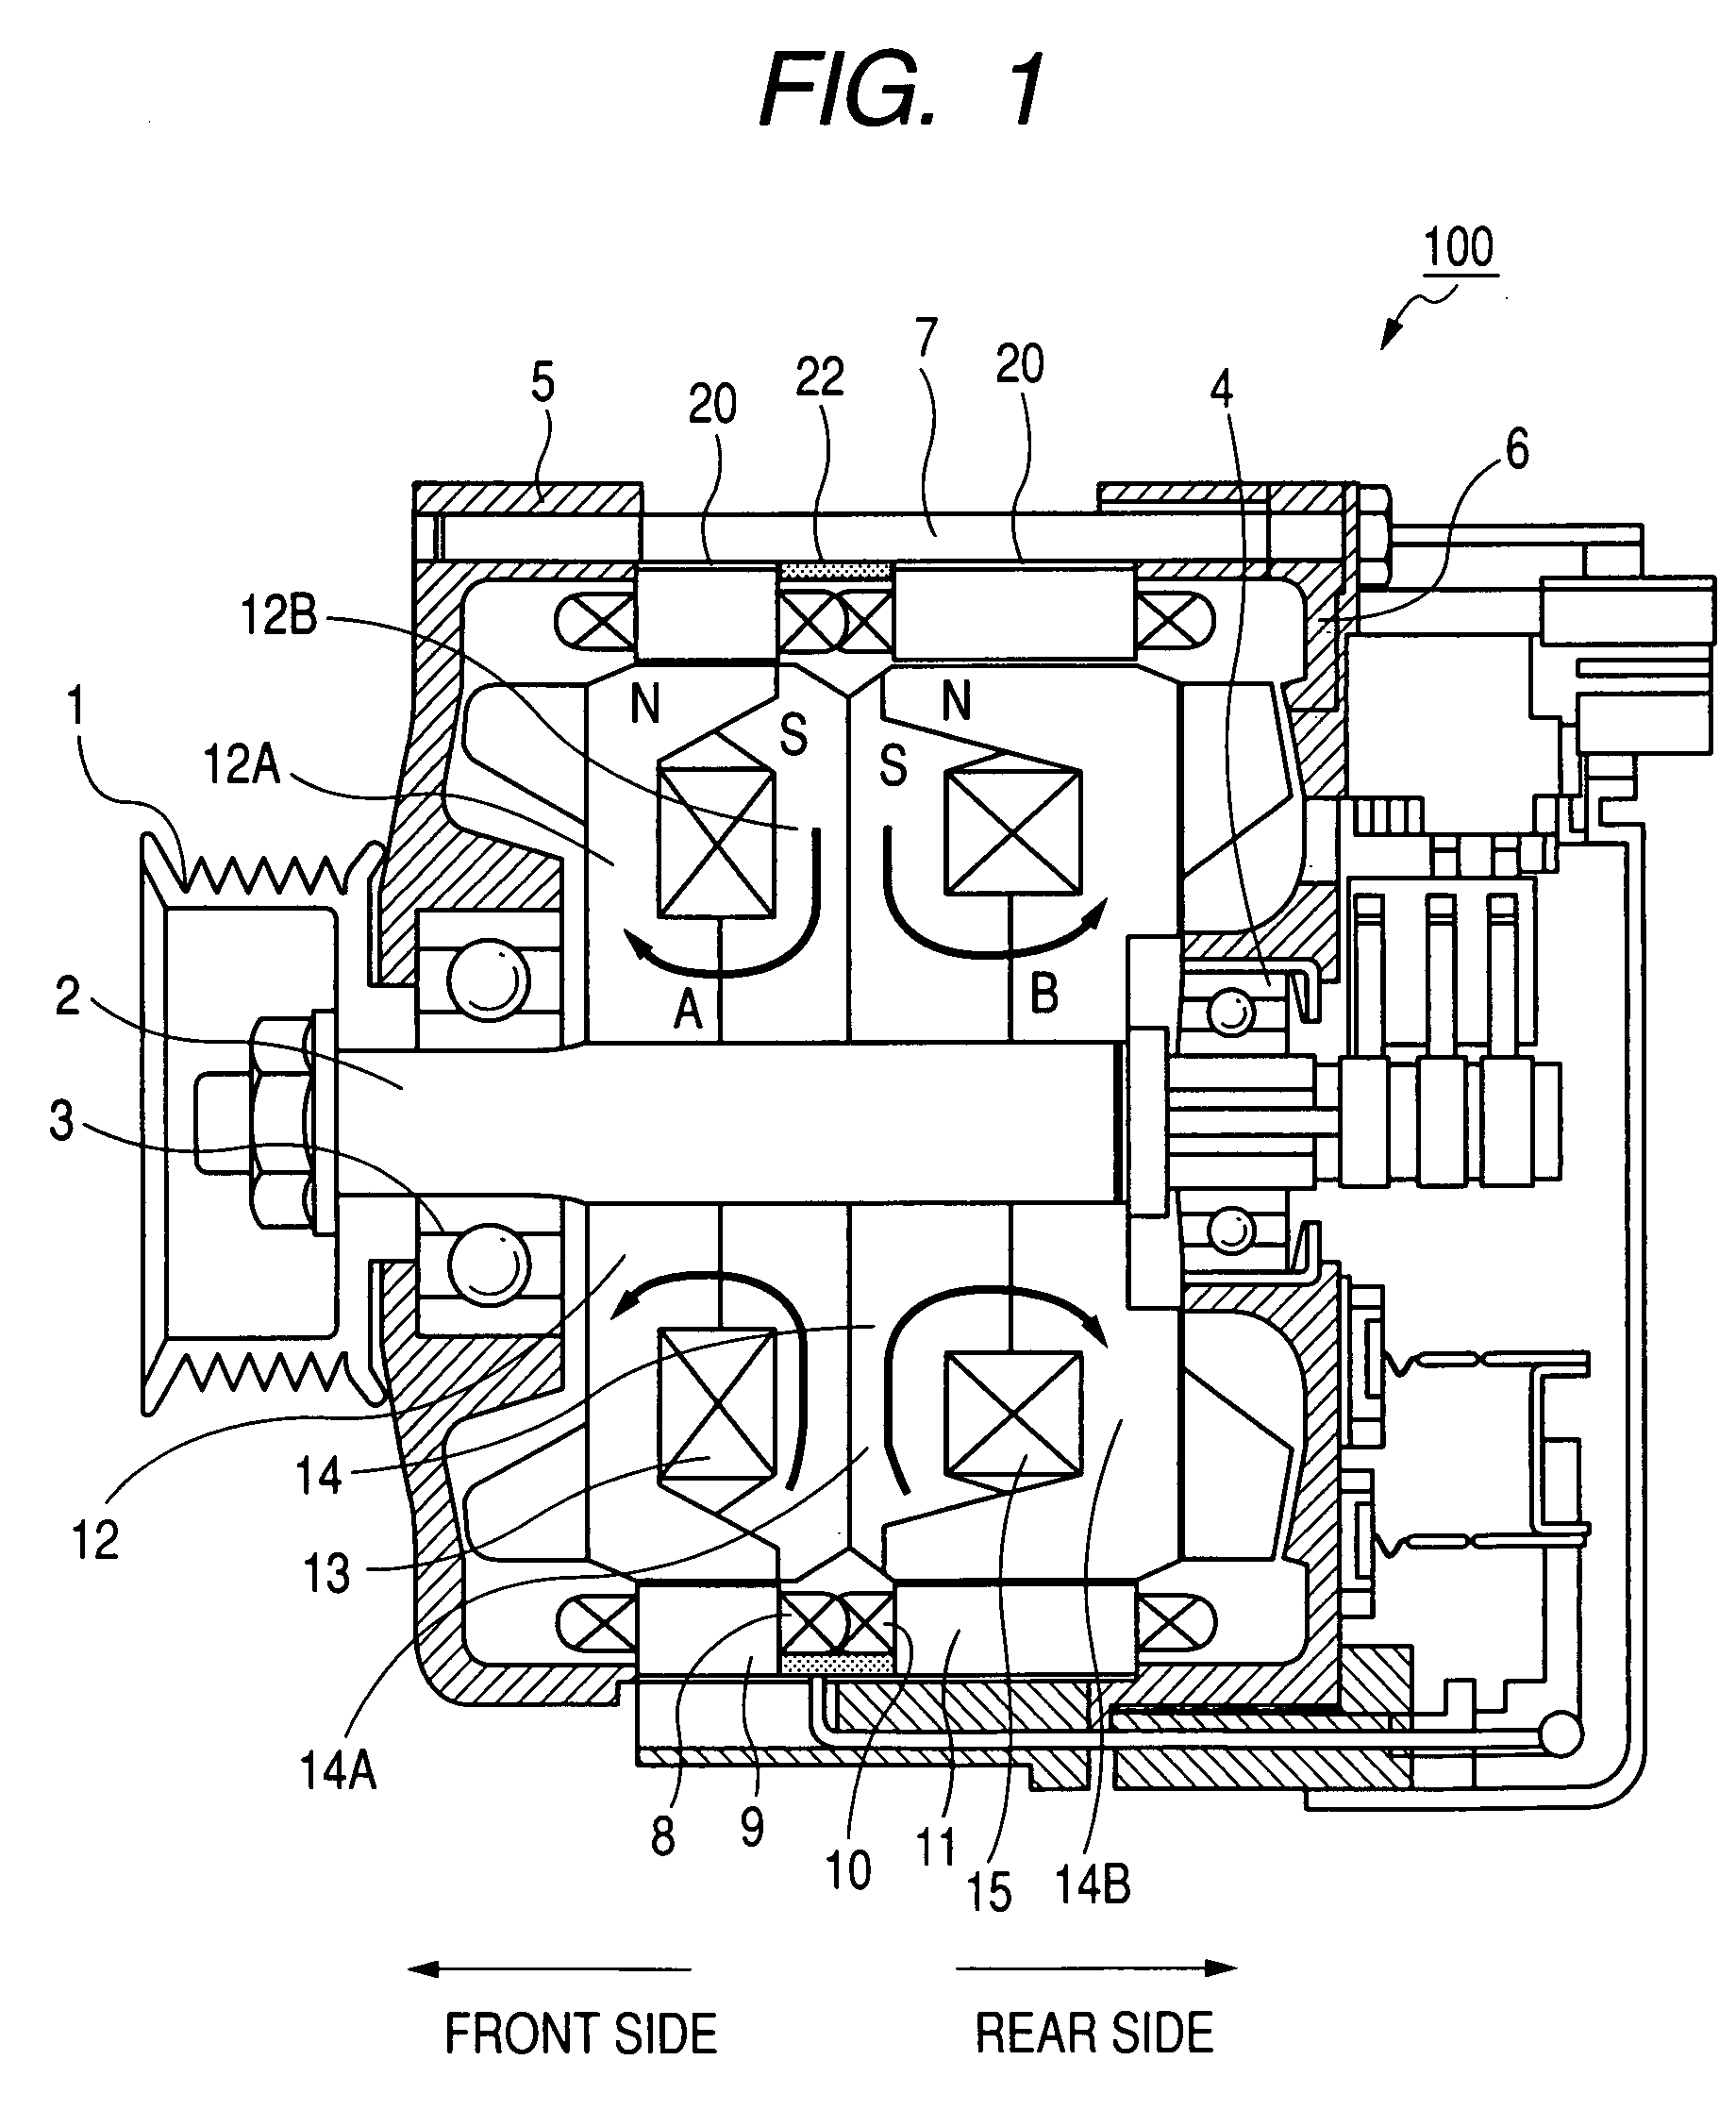 Automotive tandem alternator having reduced axial length and capable of effectively suppressing magnetic leakage